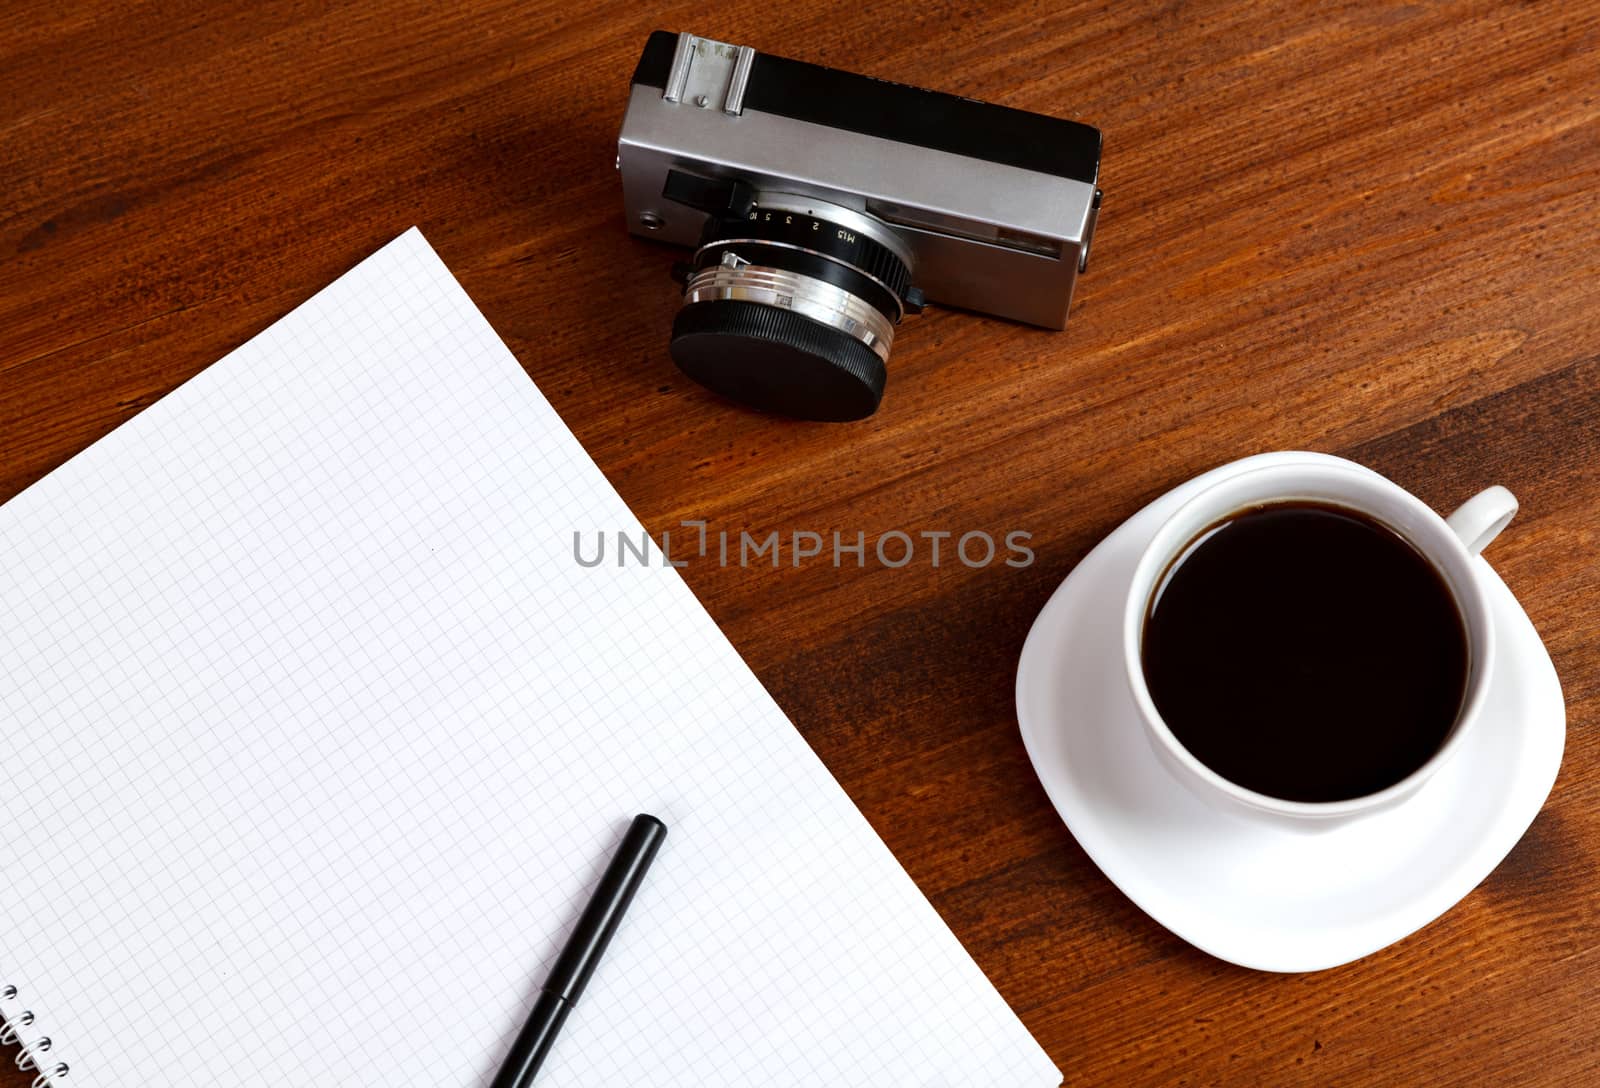 Retro film photo camera, cup of coffee and notebook with pencil on brown table. Top view.